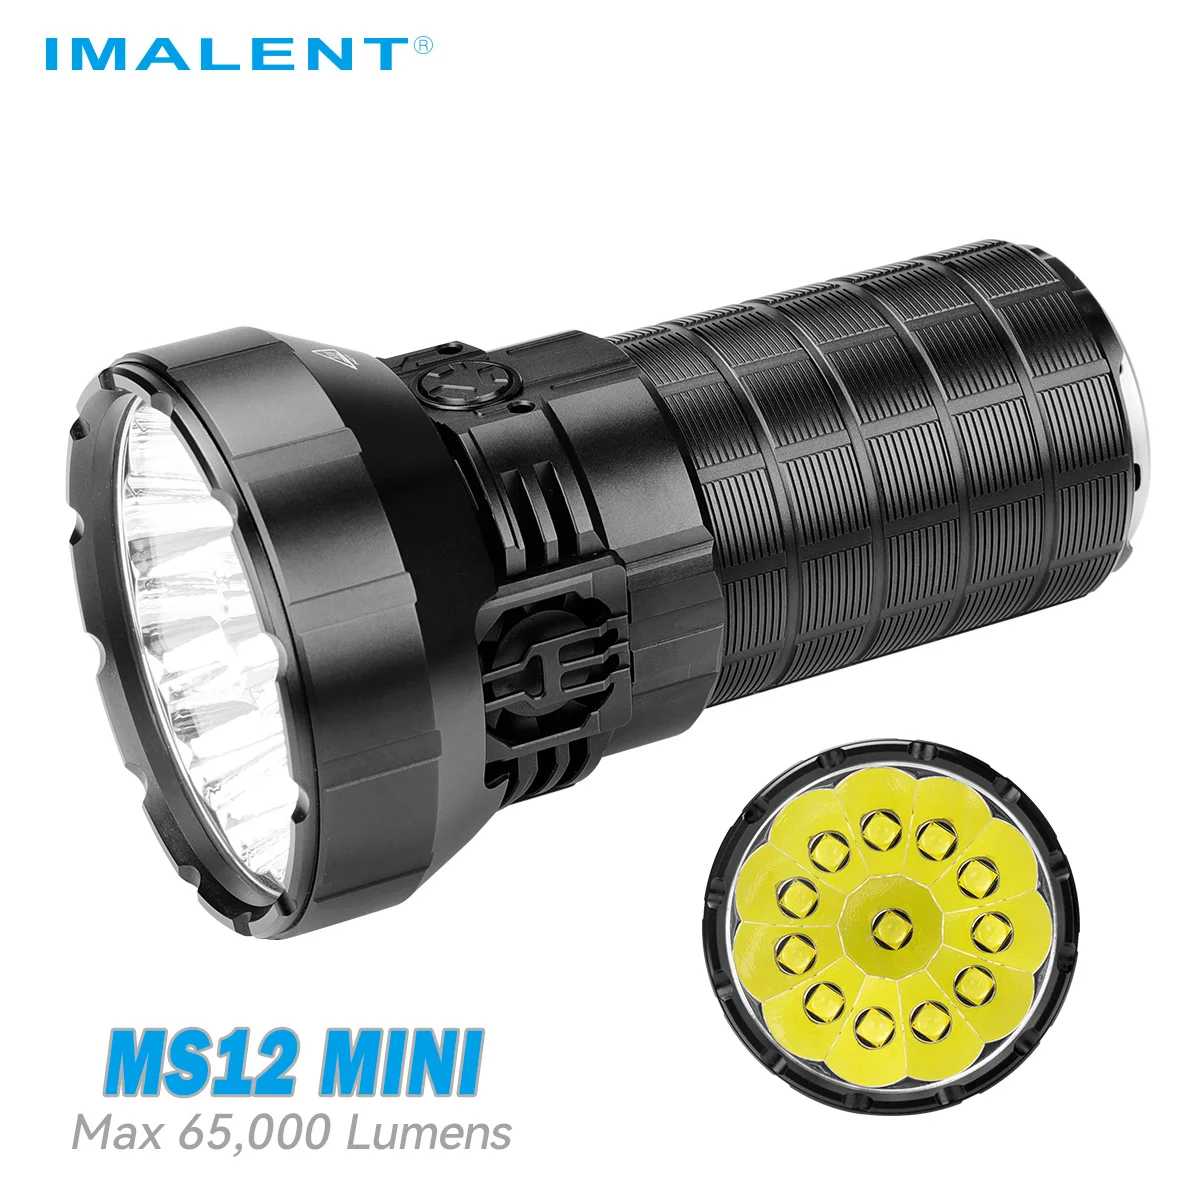 

IMALENT MS12 Mini Rechargeable Flashlight High Power 65000 Lumen Cree XHP70.2 LEDs Handlight, LED Torch for Rescue and Searching